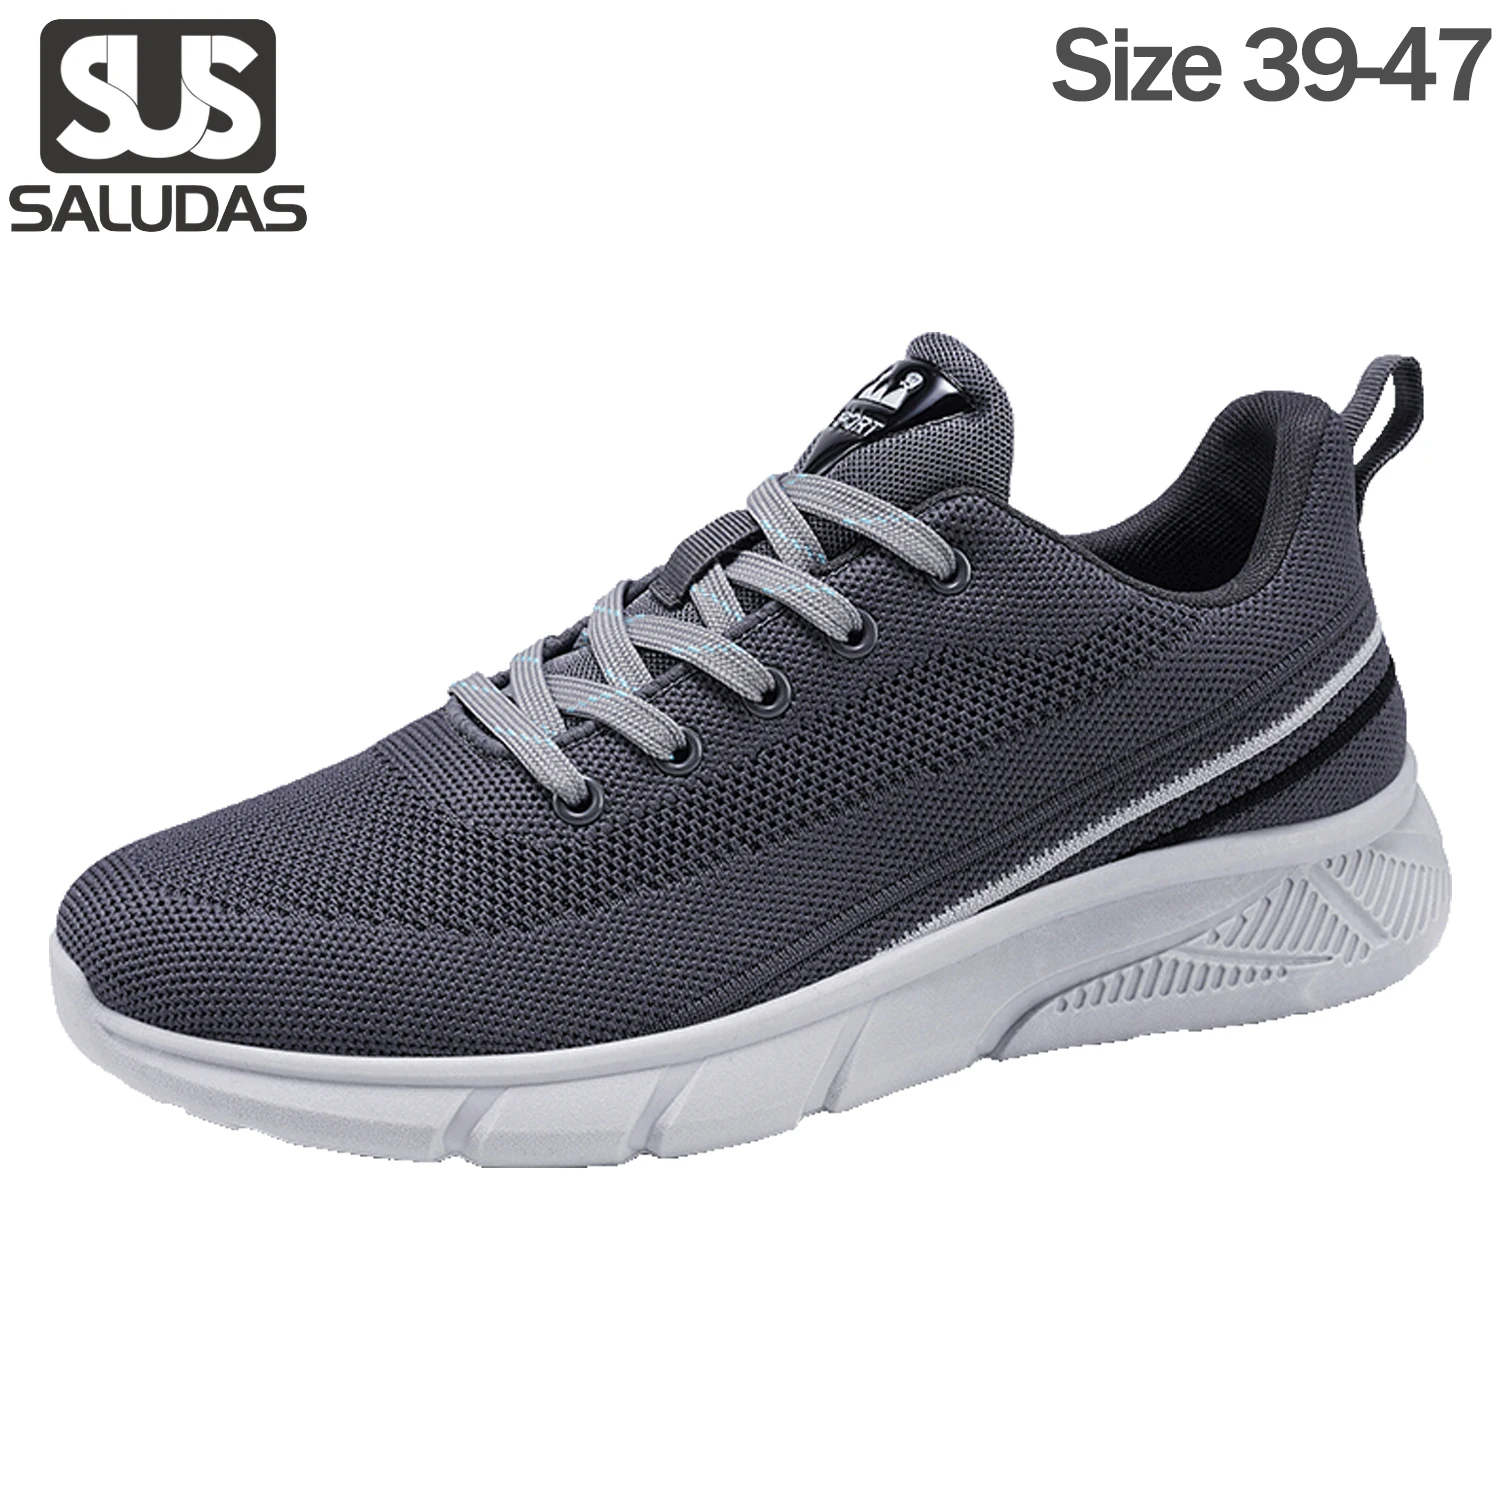 

SALUDAS Sneakers Running Shoes Men Lightweight Breathable Sneakers Athletic Shoes Comfor Casual Shoes Walking Gym Tennis Shoes